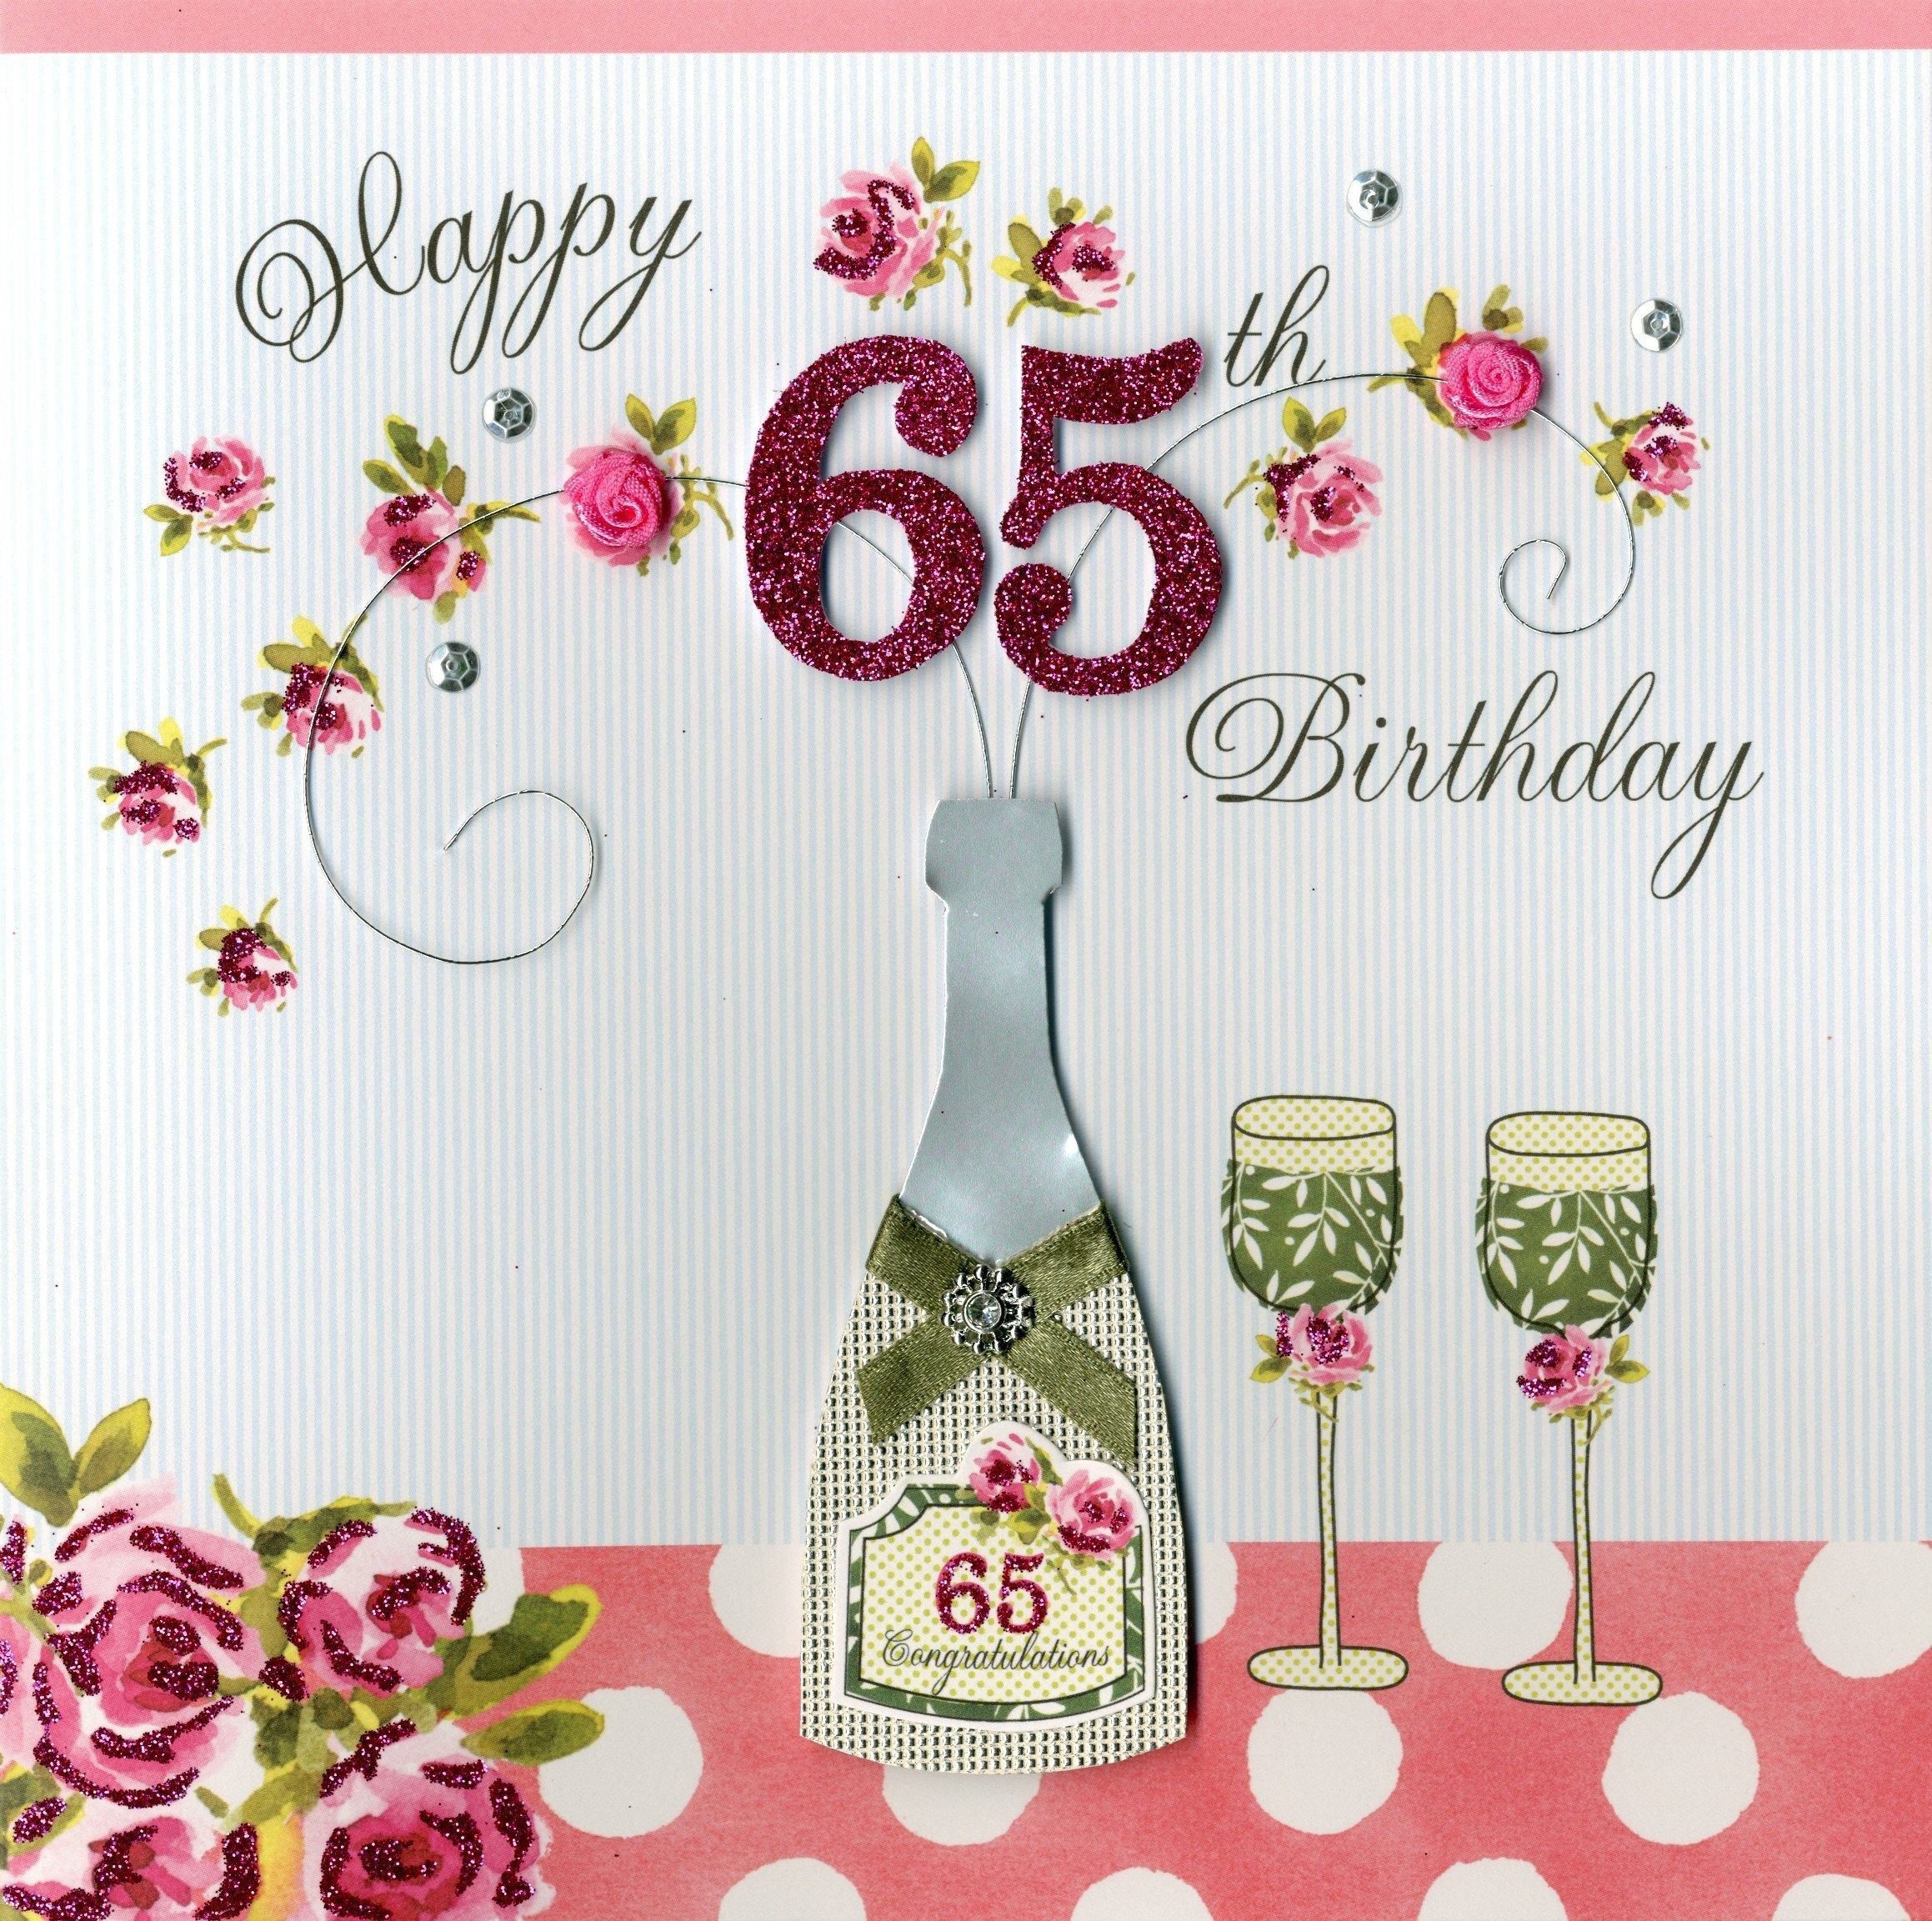 65th Birthday Wishes
 Handmade Birthday Cards And Gifts Happy 65th Birthday